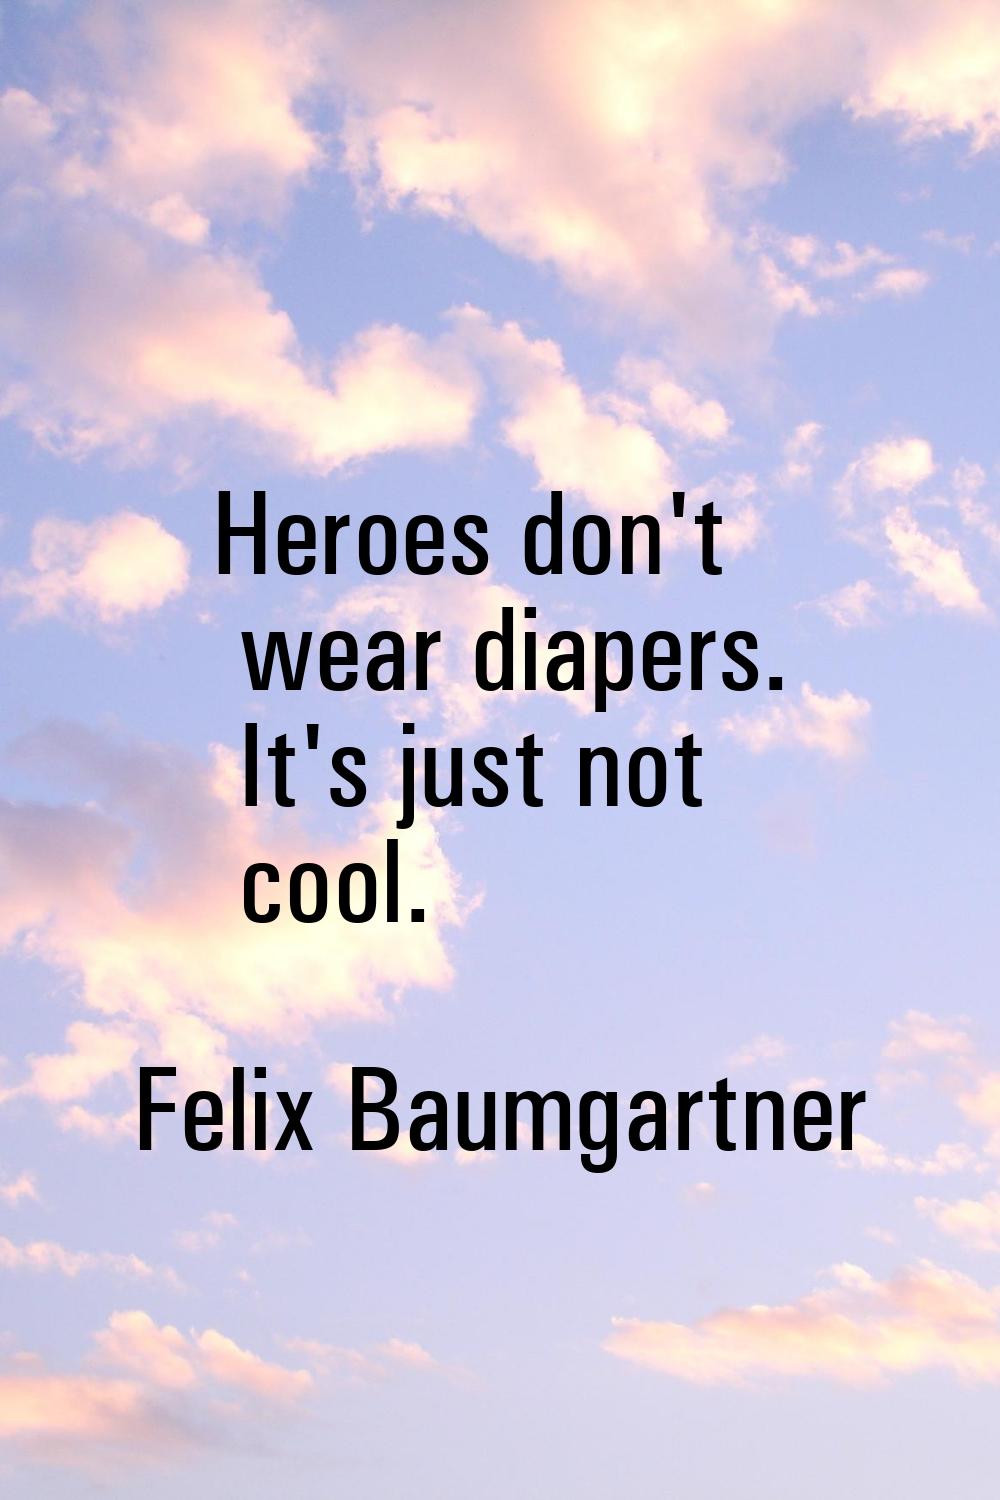 Heroes don't wear diapers. It's just not cool.